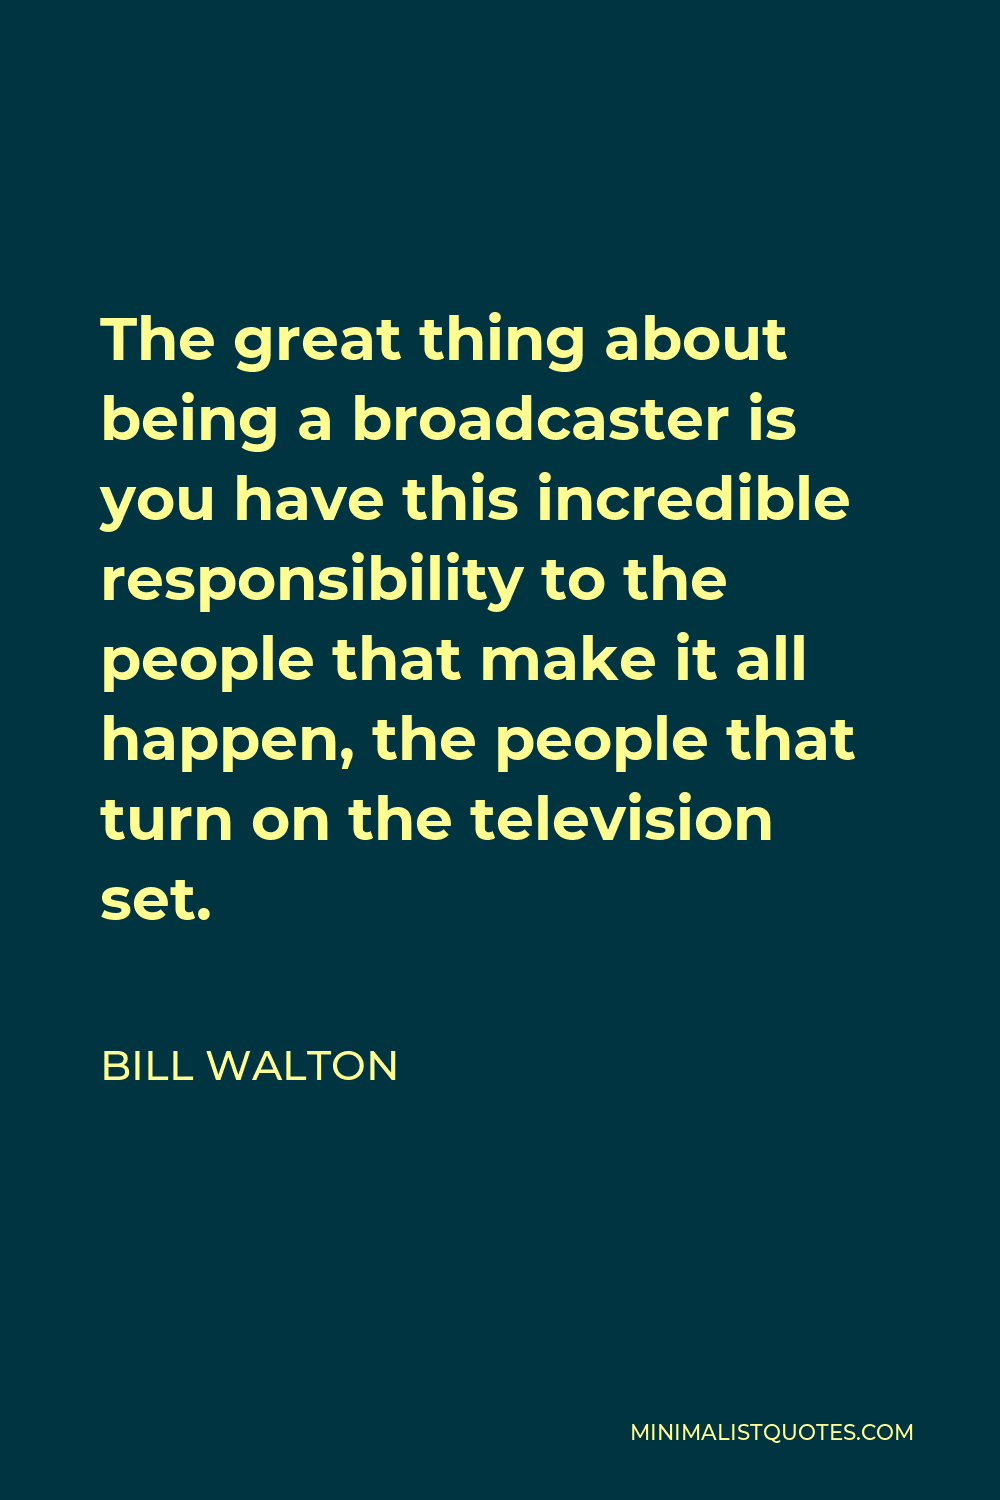 Bill Walton Quote - The great thing about being a broadcaster is you have this incredible responsibility to the people that make it all happen, the people that turn on the television set.